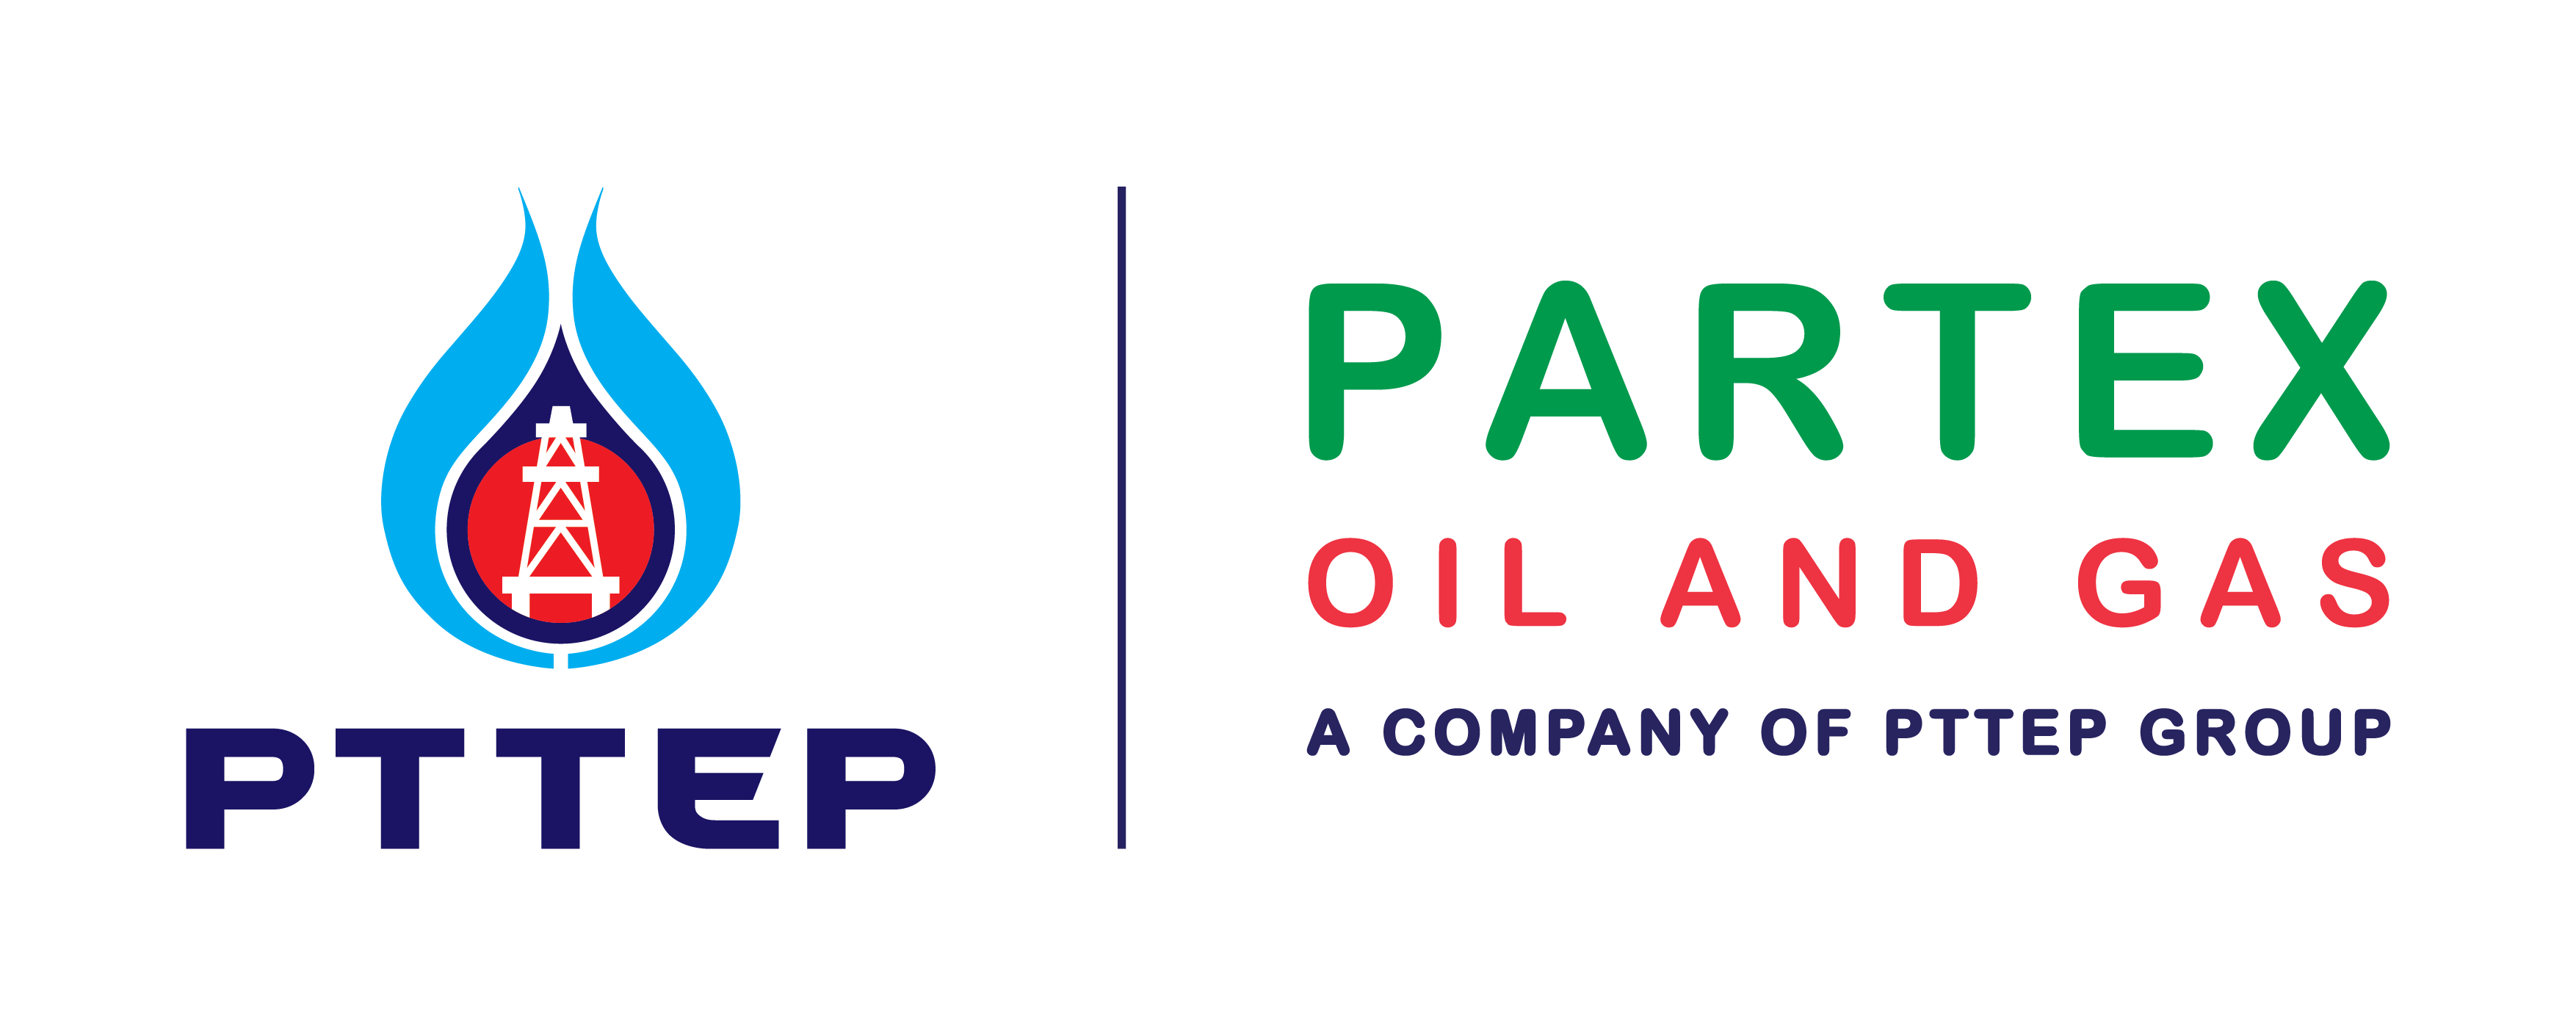 Portugal Partex Oil and Gas